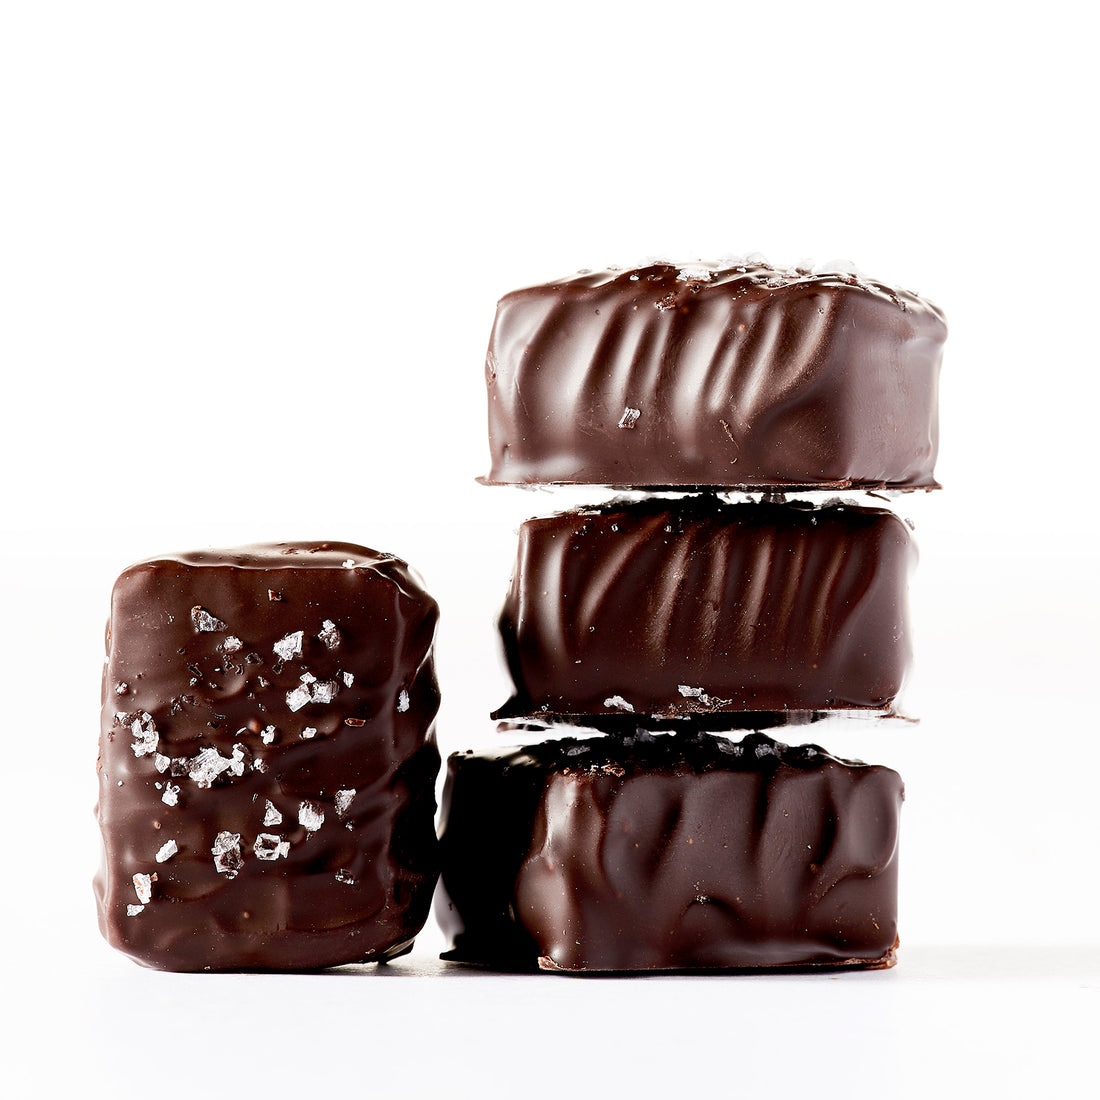 Sea Salt Chocolate Caramels (4) Wooden Table Baking Co.